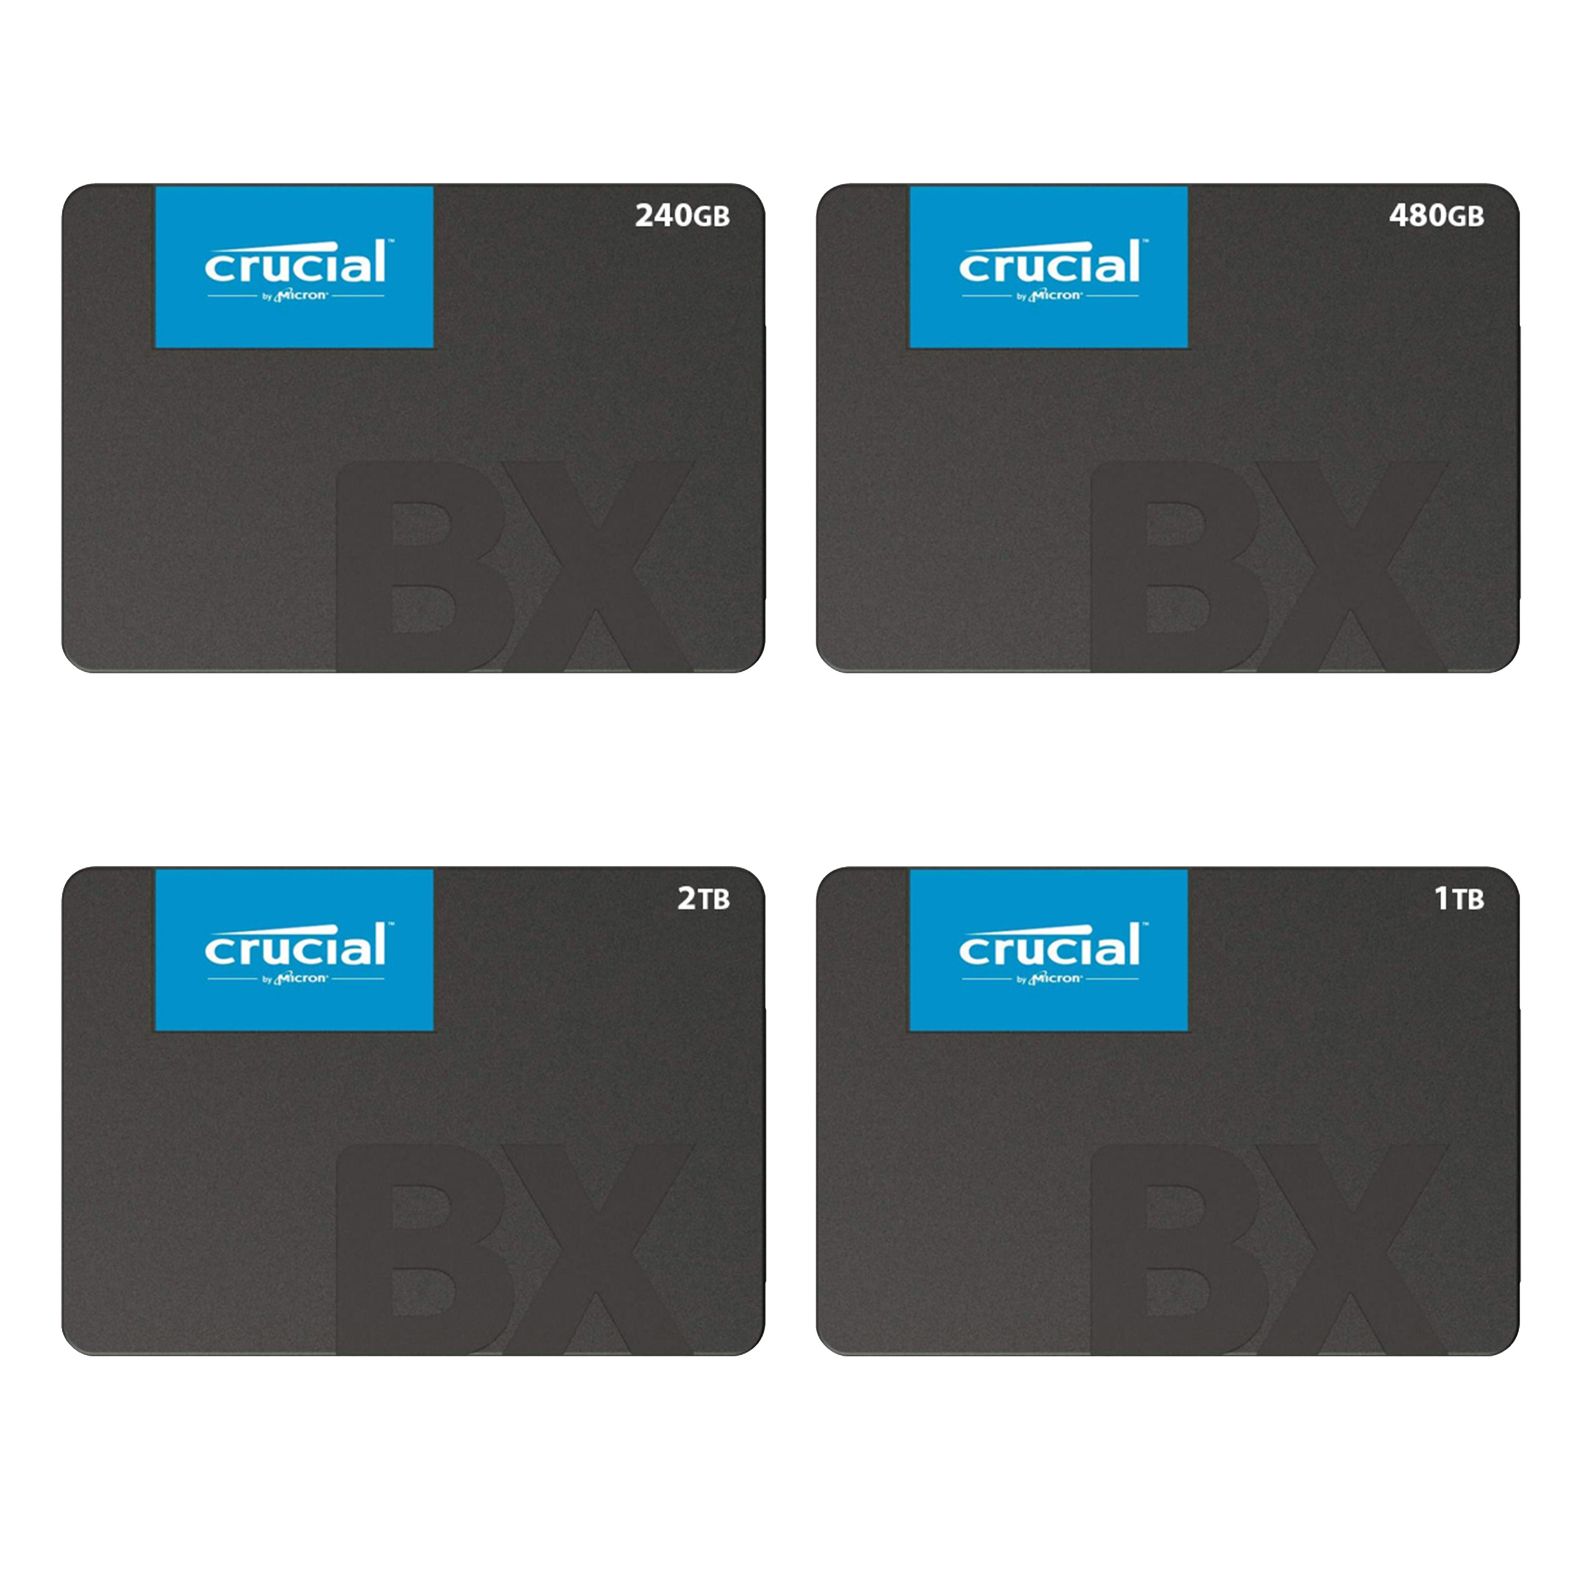 Buy Crucial Solid State Drive | Fastest SSD Hard Drive | BENIDATA